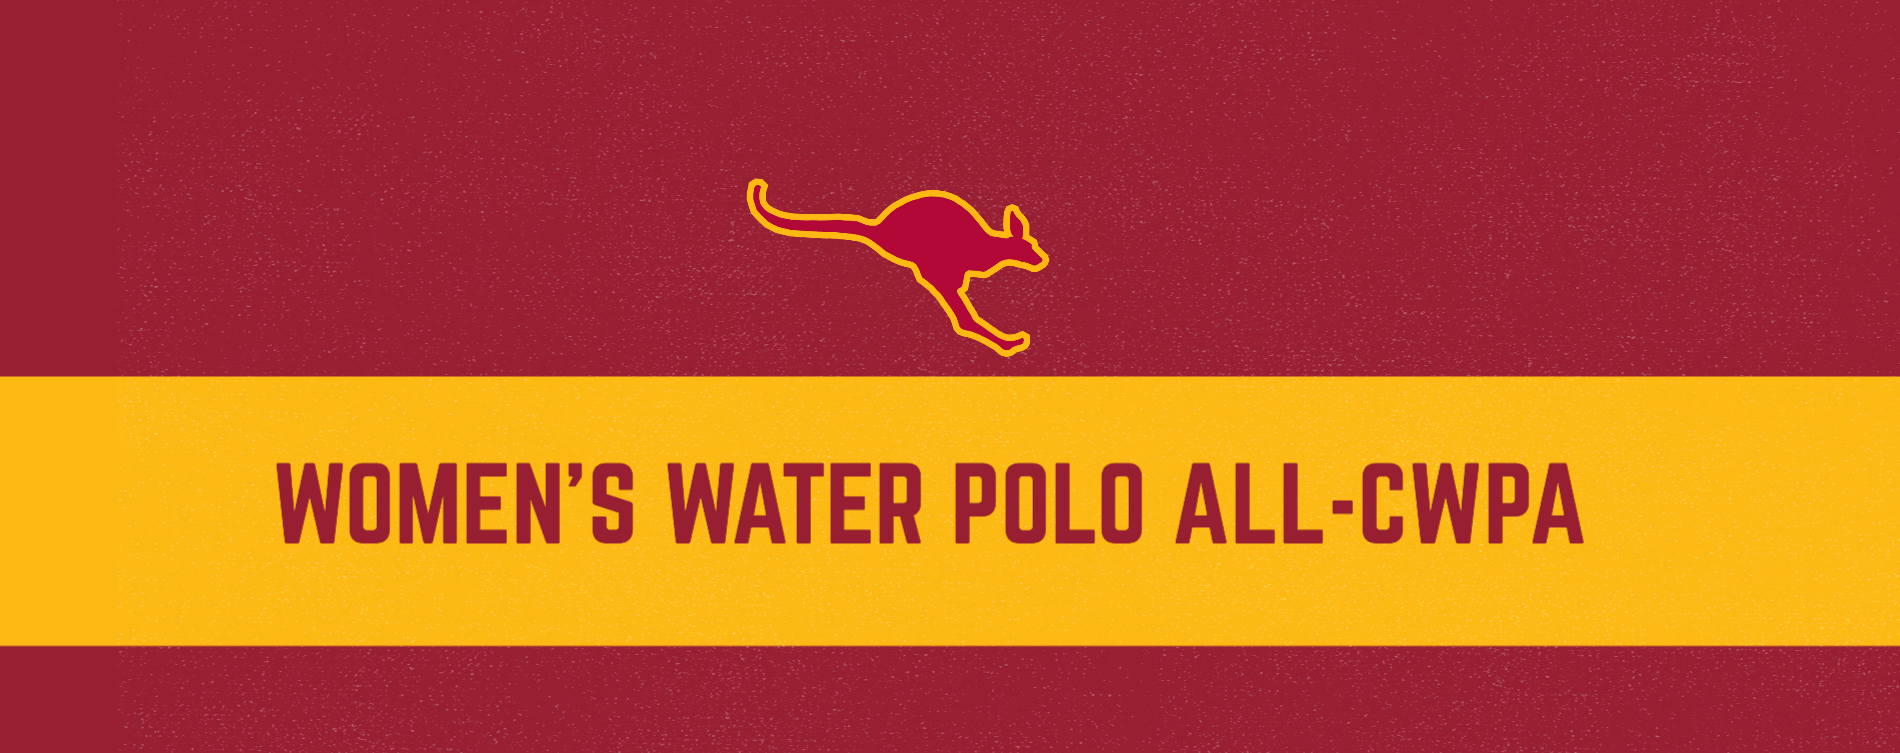 Le, Lawrence Highlight Women's Water Polo All-CWPA